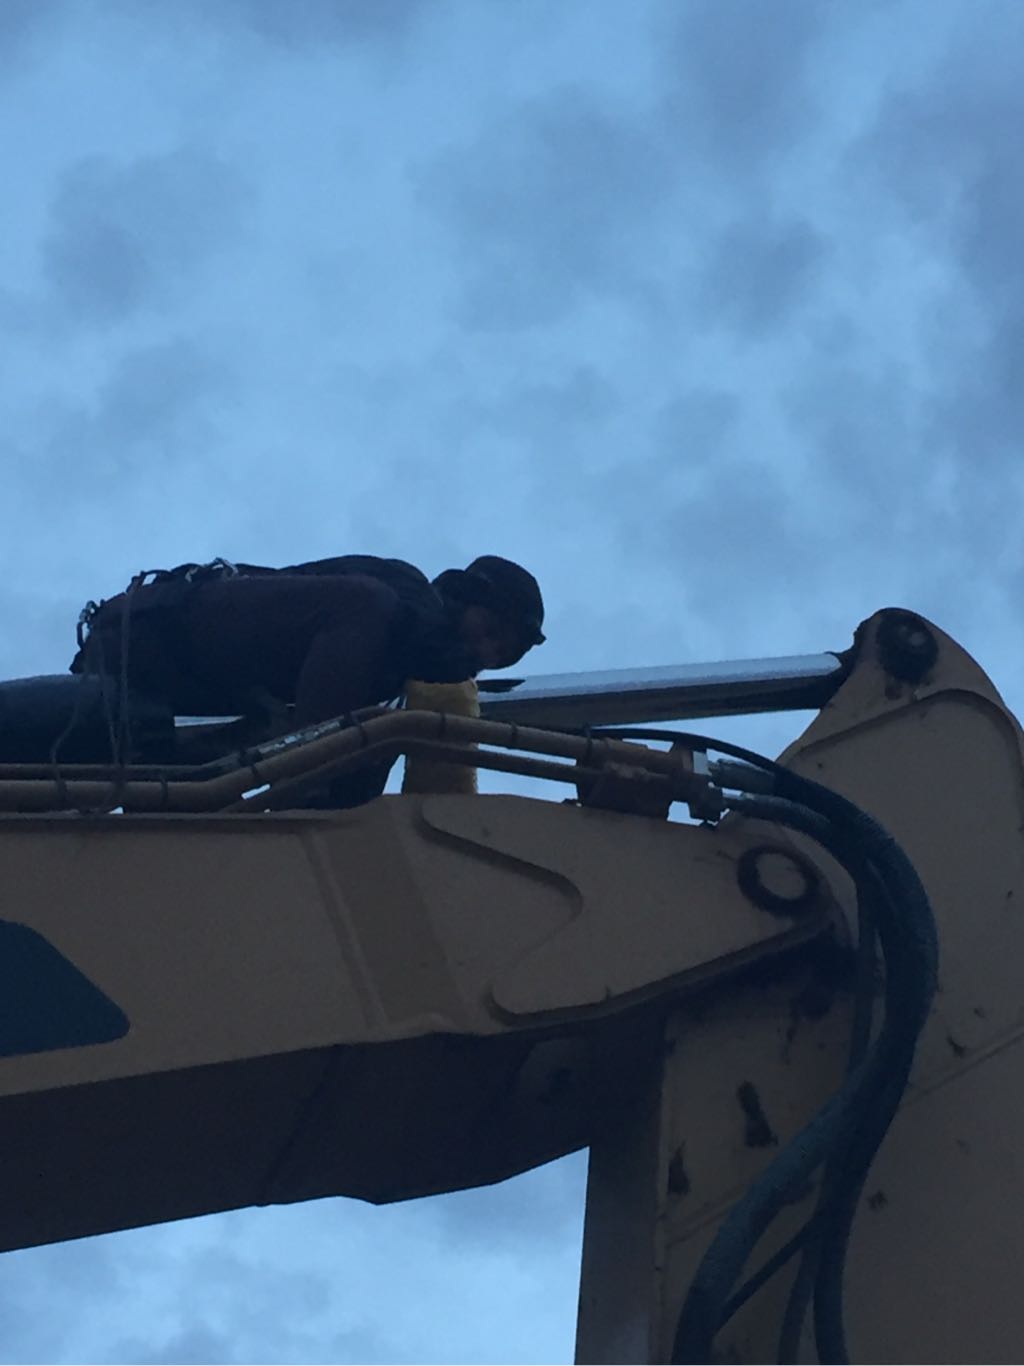 A water protector attaching themselves to the hydraulic arm of a DAPL excavator using a lockbox device